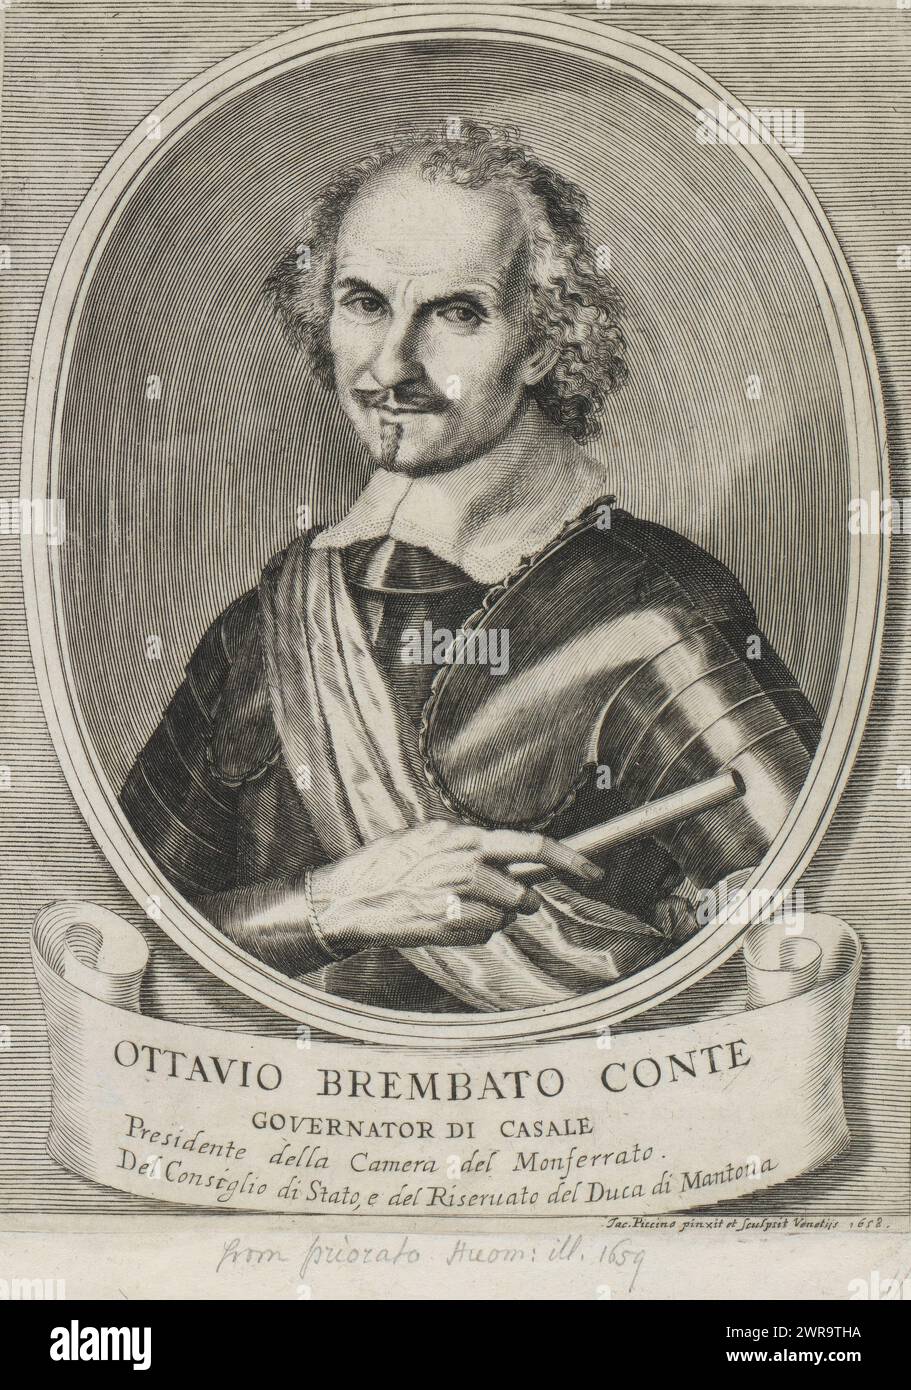 Portrait of biologist Ottavio Brembato, print maker: Giacomo Piccini, after painting by: Giacomo Piccini, publisher: Andrea Giuliani, Venice, 1658 and/or 1659, paper, engraving, height 200 mm × width 152 mm, print Stock Photo